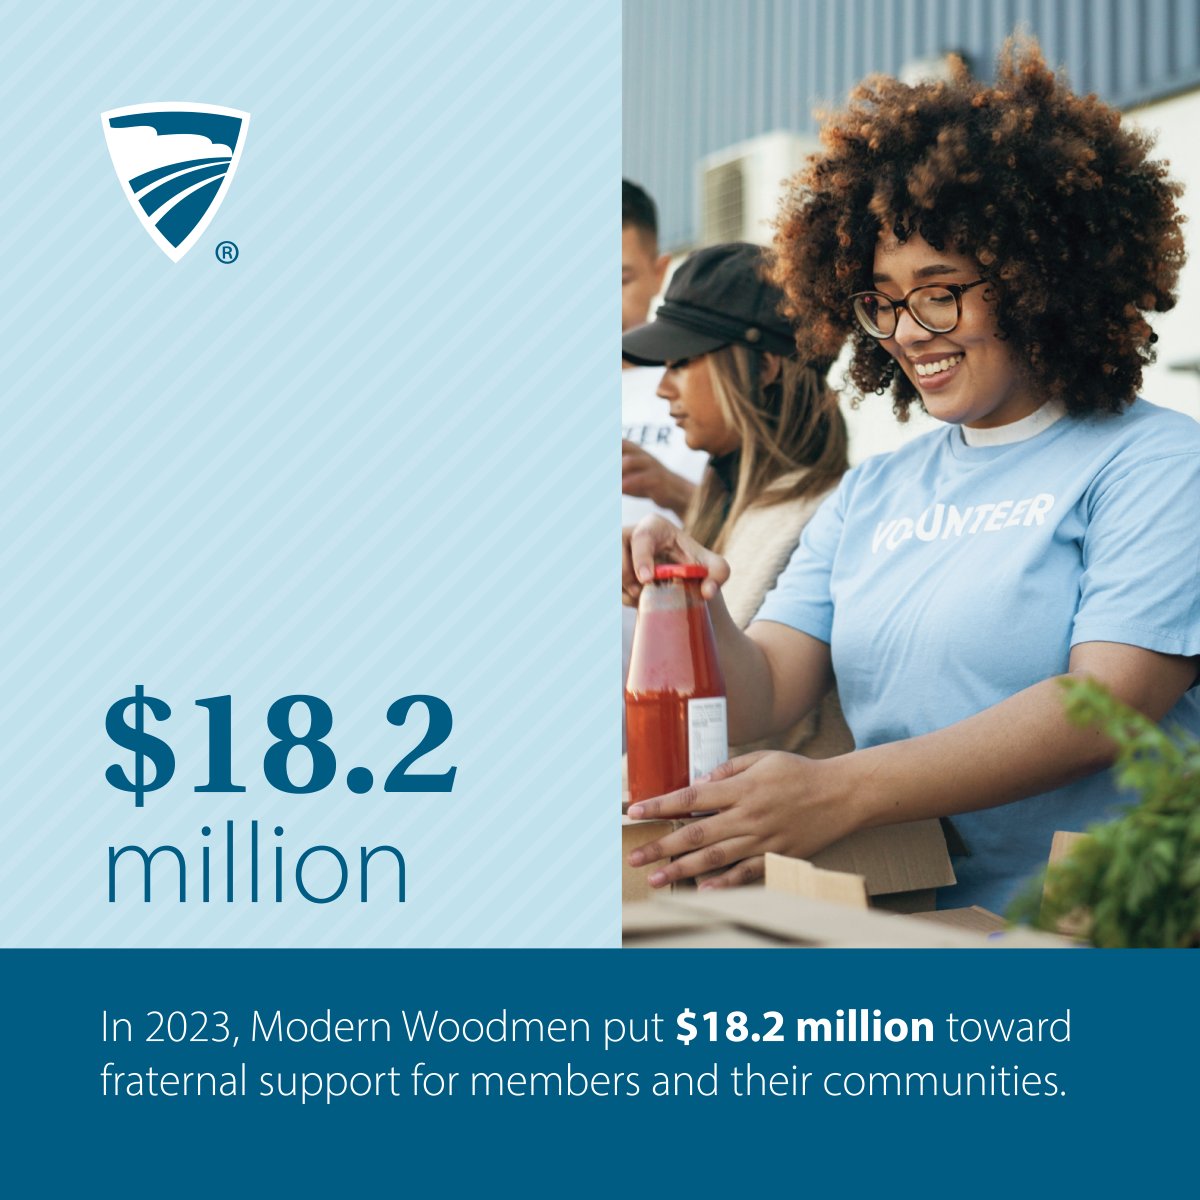 Each year we pioneer bright futures in the communities we serve. See highlights from 2023 below, including total life insurance in force and total fraternal support given to members and their communities. modernwoodmen.org/about-us/news-… #Modernsince1883 #Pioneersforlife